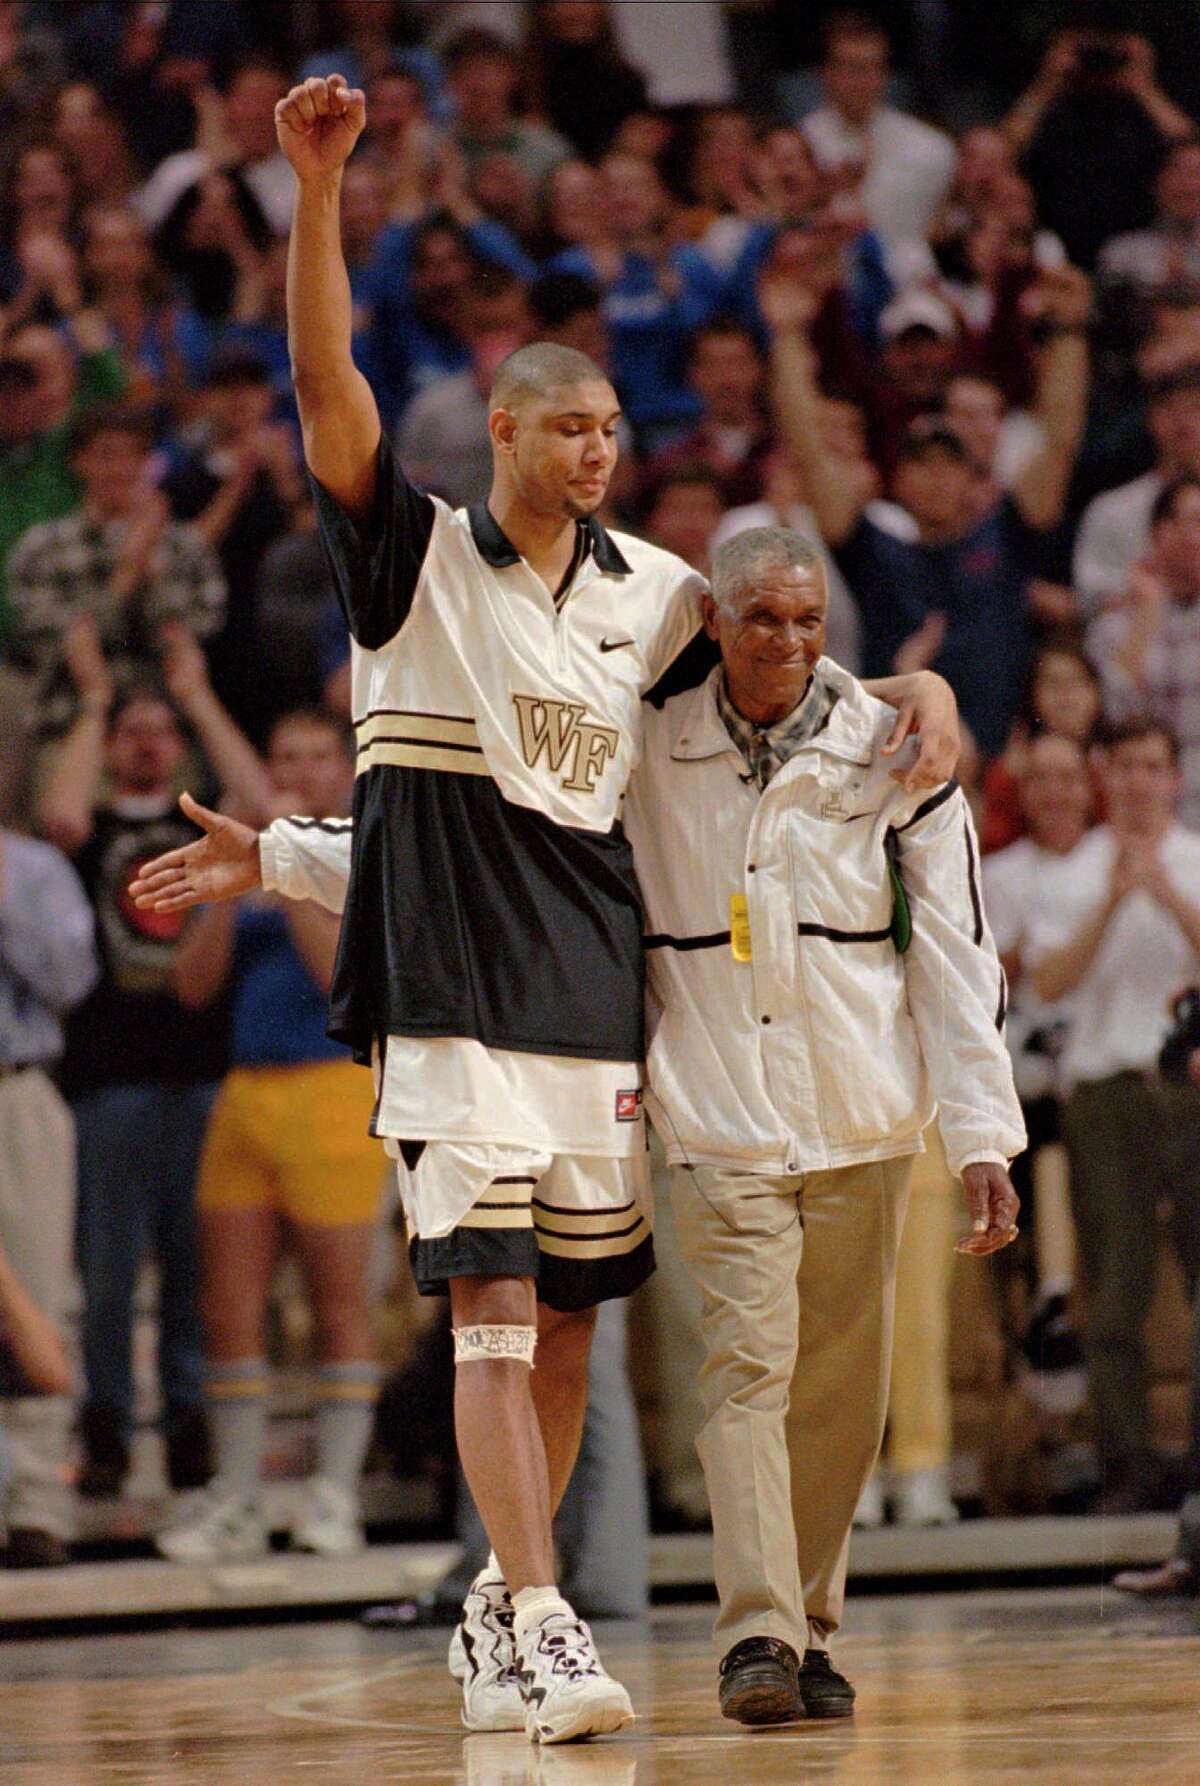 ** FILE ** Wake Forest All-American center Tim Duncan and his dad, William, are introduced to the crowd, at Joel Coliseum, in Winston-Salem, N.C., before the start of a game against Georgia Tech, in this February 25, 1997 photo. Duncan's jersey was being retired after the game. Tim Duncan will miss Game 4 of the San Antonio Spurs' playoff series Wednesday night, May 1, 2002 against the Seattle SuperSonics after his father died earlier this week. (AP Photo/Bob Jordan)